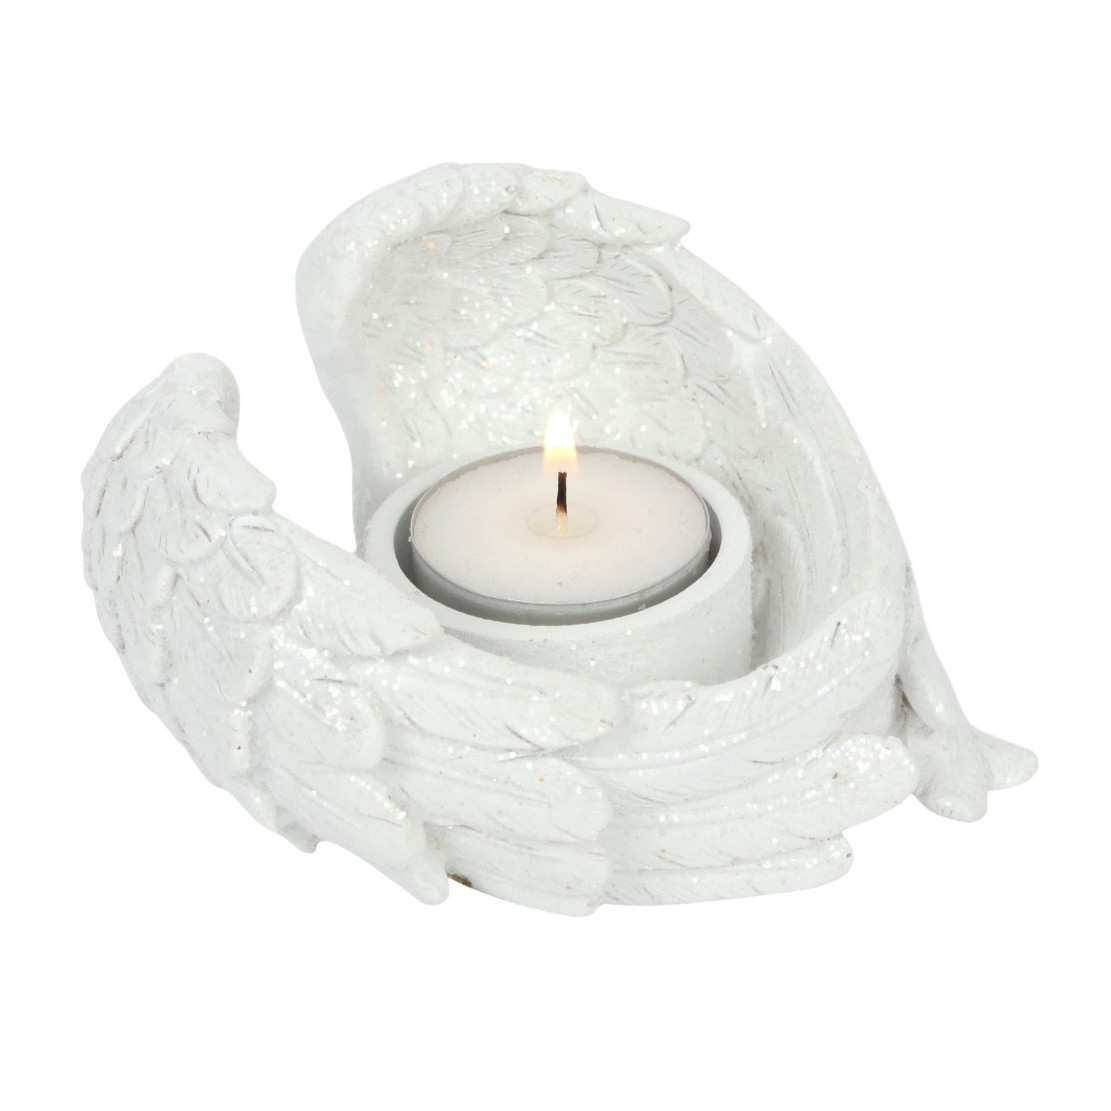 Glitter Angel Wing tealight Candle Holder